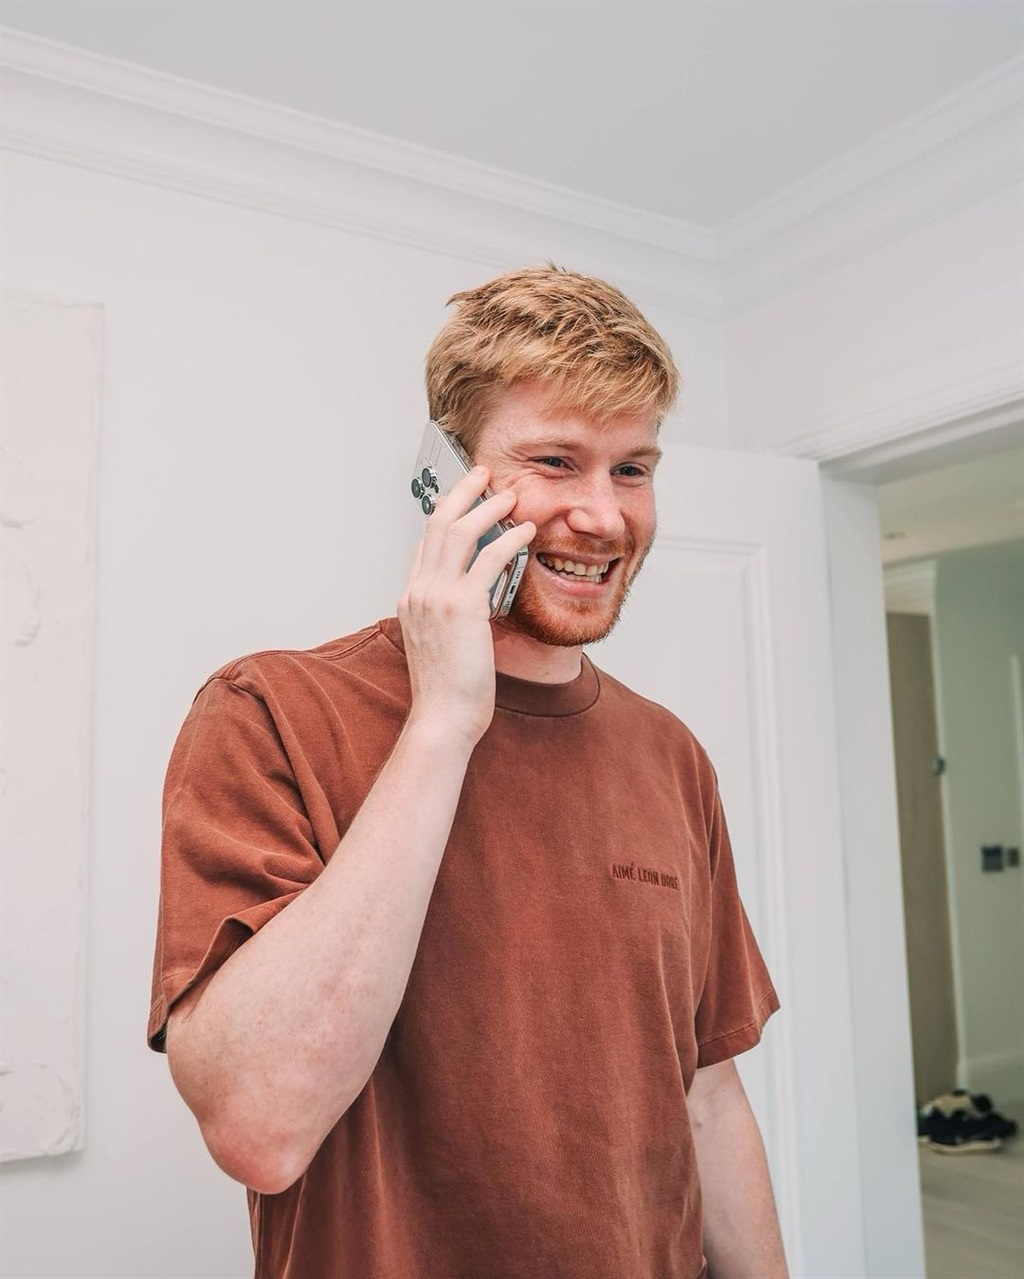 Kevin De Bruyne has handed out 26 specially commissioned iPhones to his Man City teammates to celebrate their Treble.